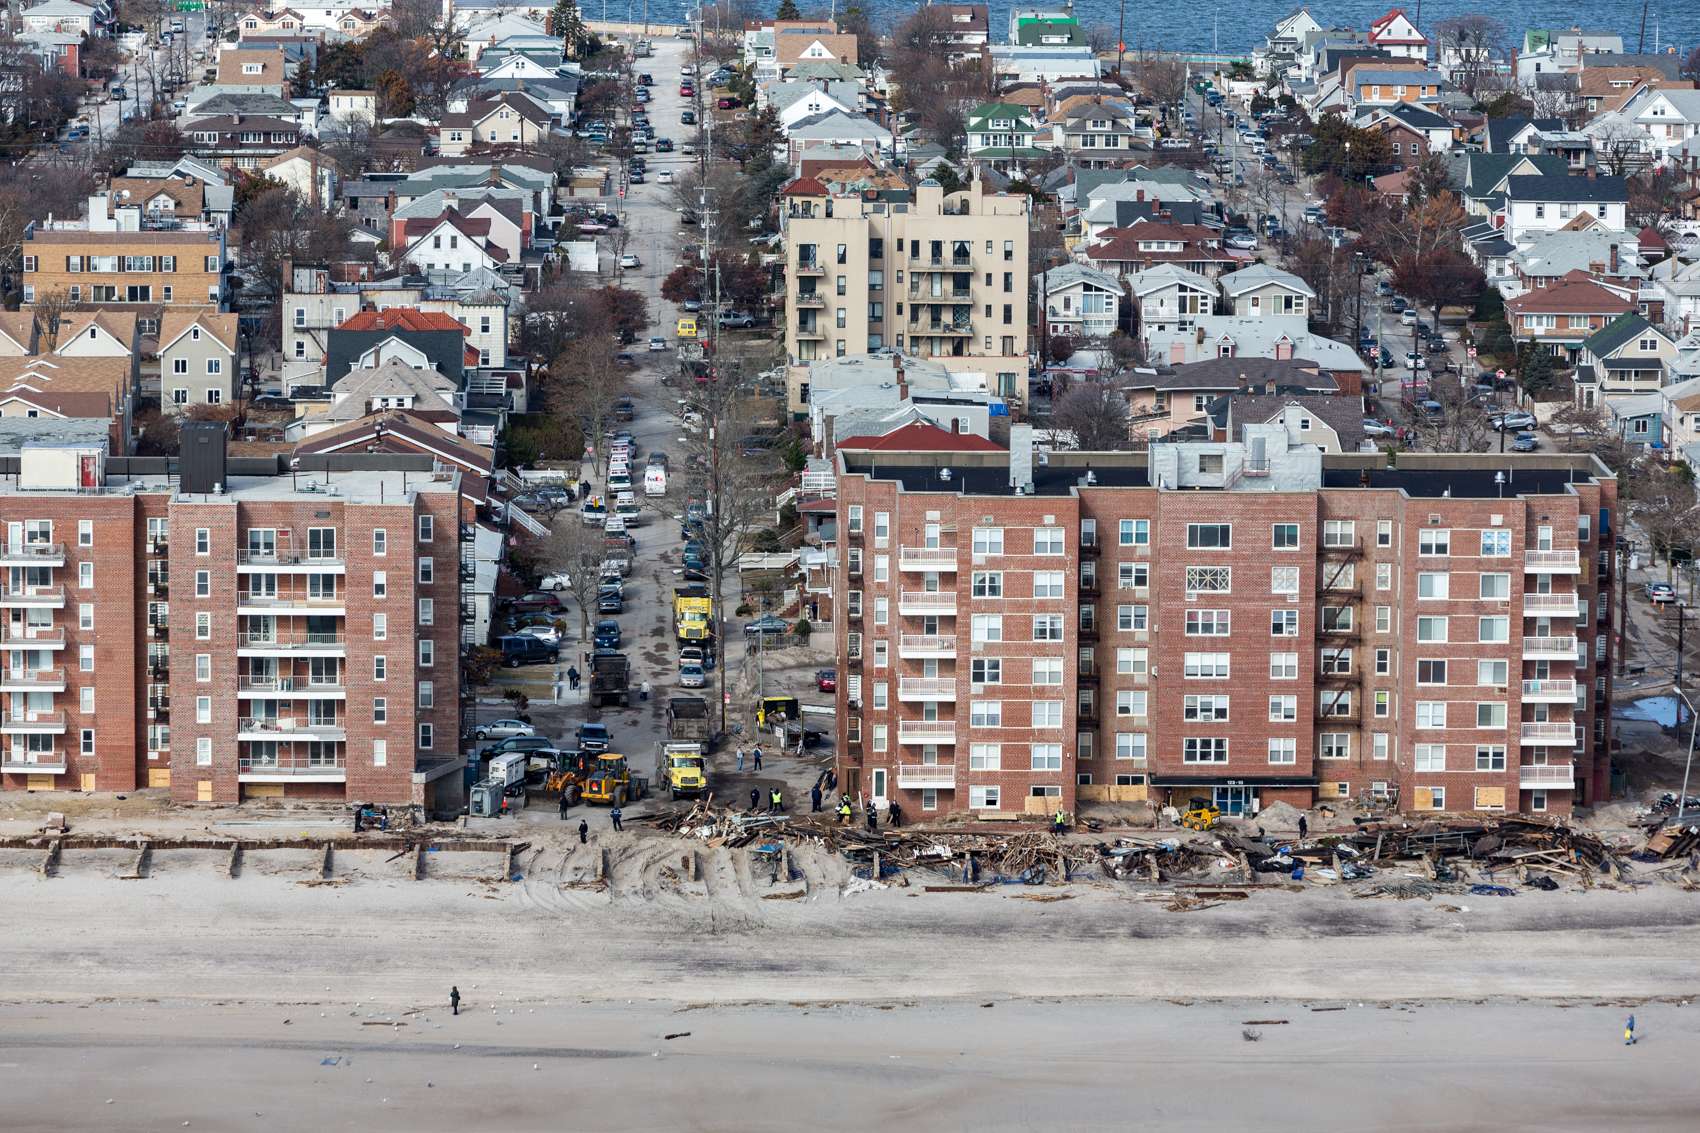 The Rockaway peninsula in Queens, New York, sits between Brooklyn and the Atlantic Ocean. Oceanfront apartments devastated by Hurricane Sandy’s winds, waves, and a subsequent fire in 2012 were cut off from aid due to flooded roads. In recent years, flooded streets from spring tides have trapped residents on a monthly basis.